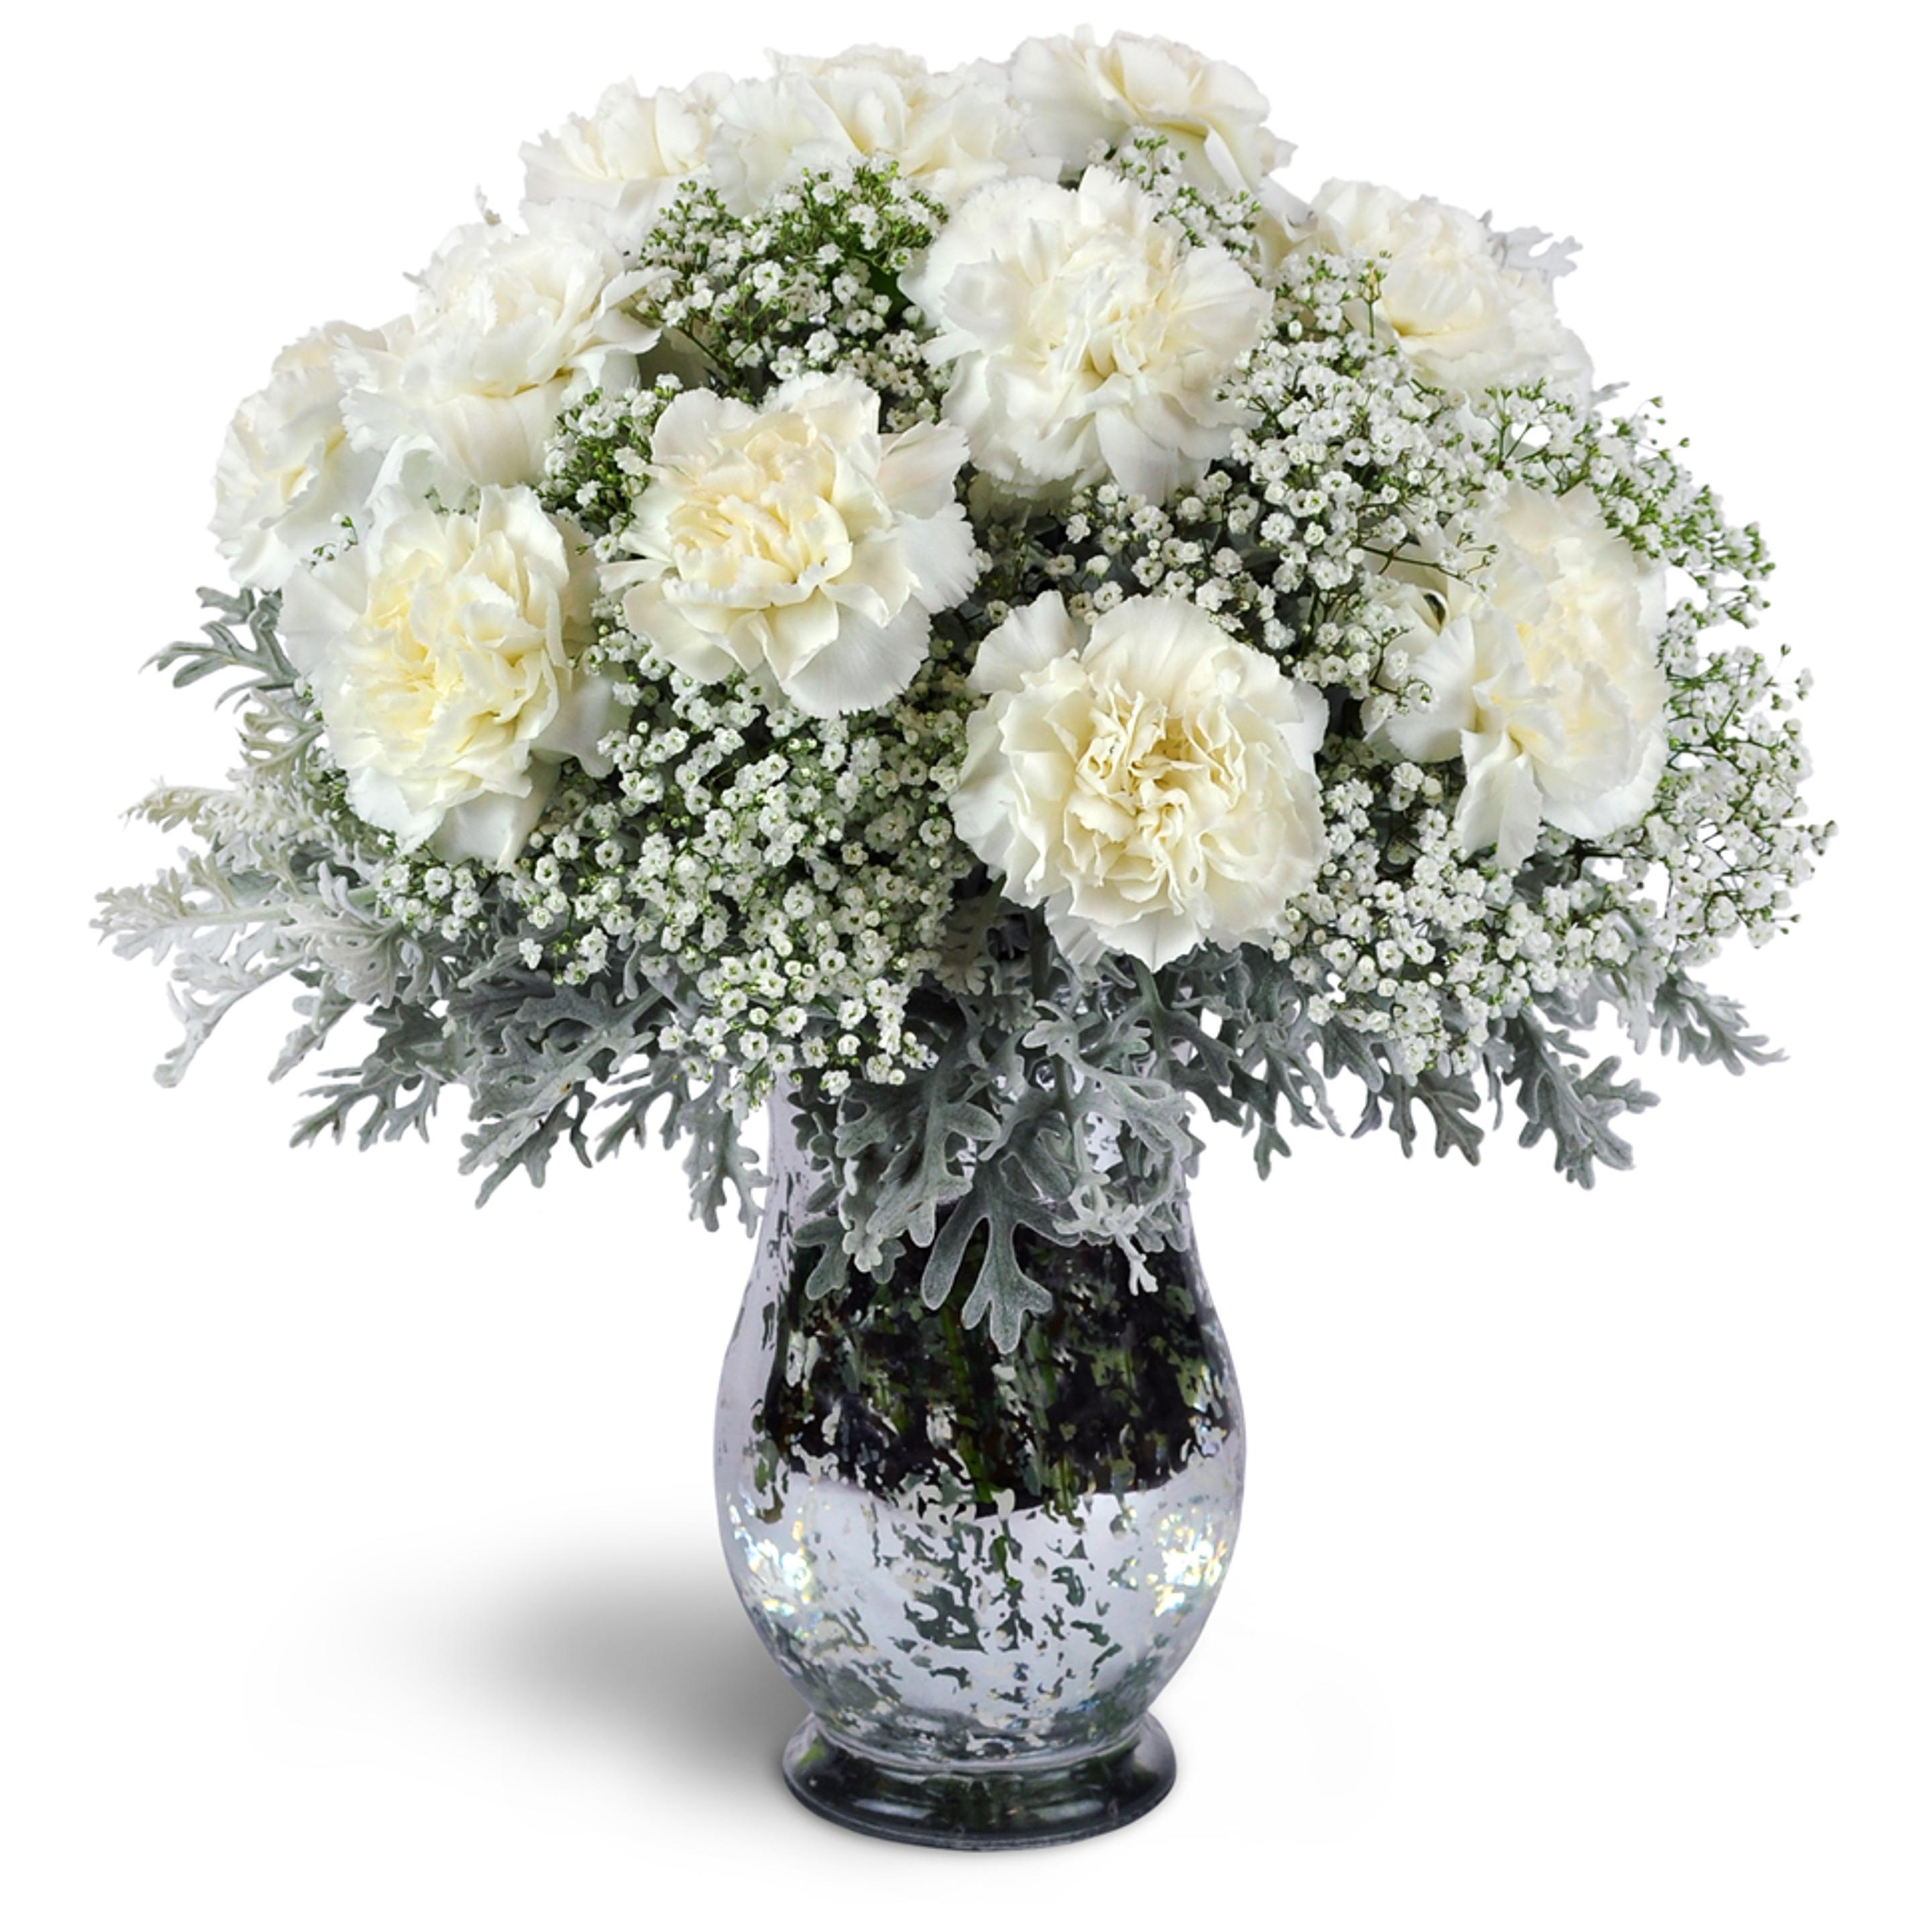 A white flower arrangement with white carnations arranged with airy baby’s breath and dusty miller.